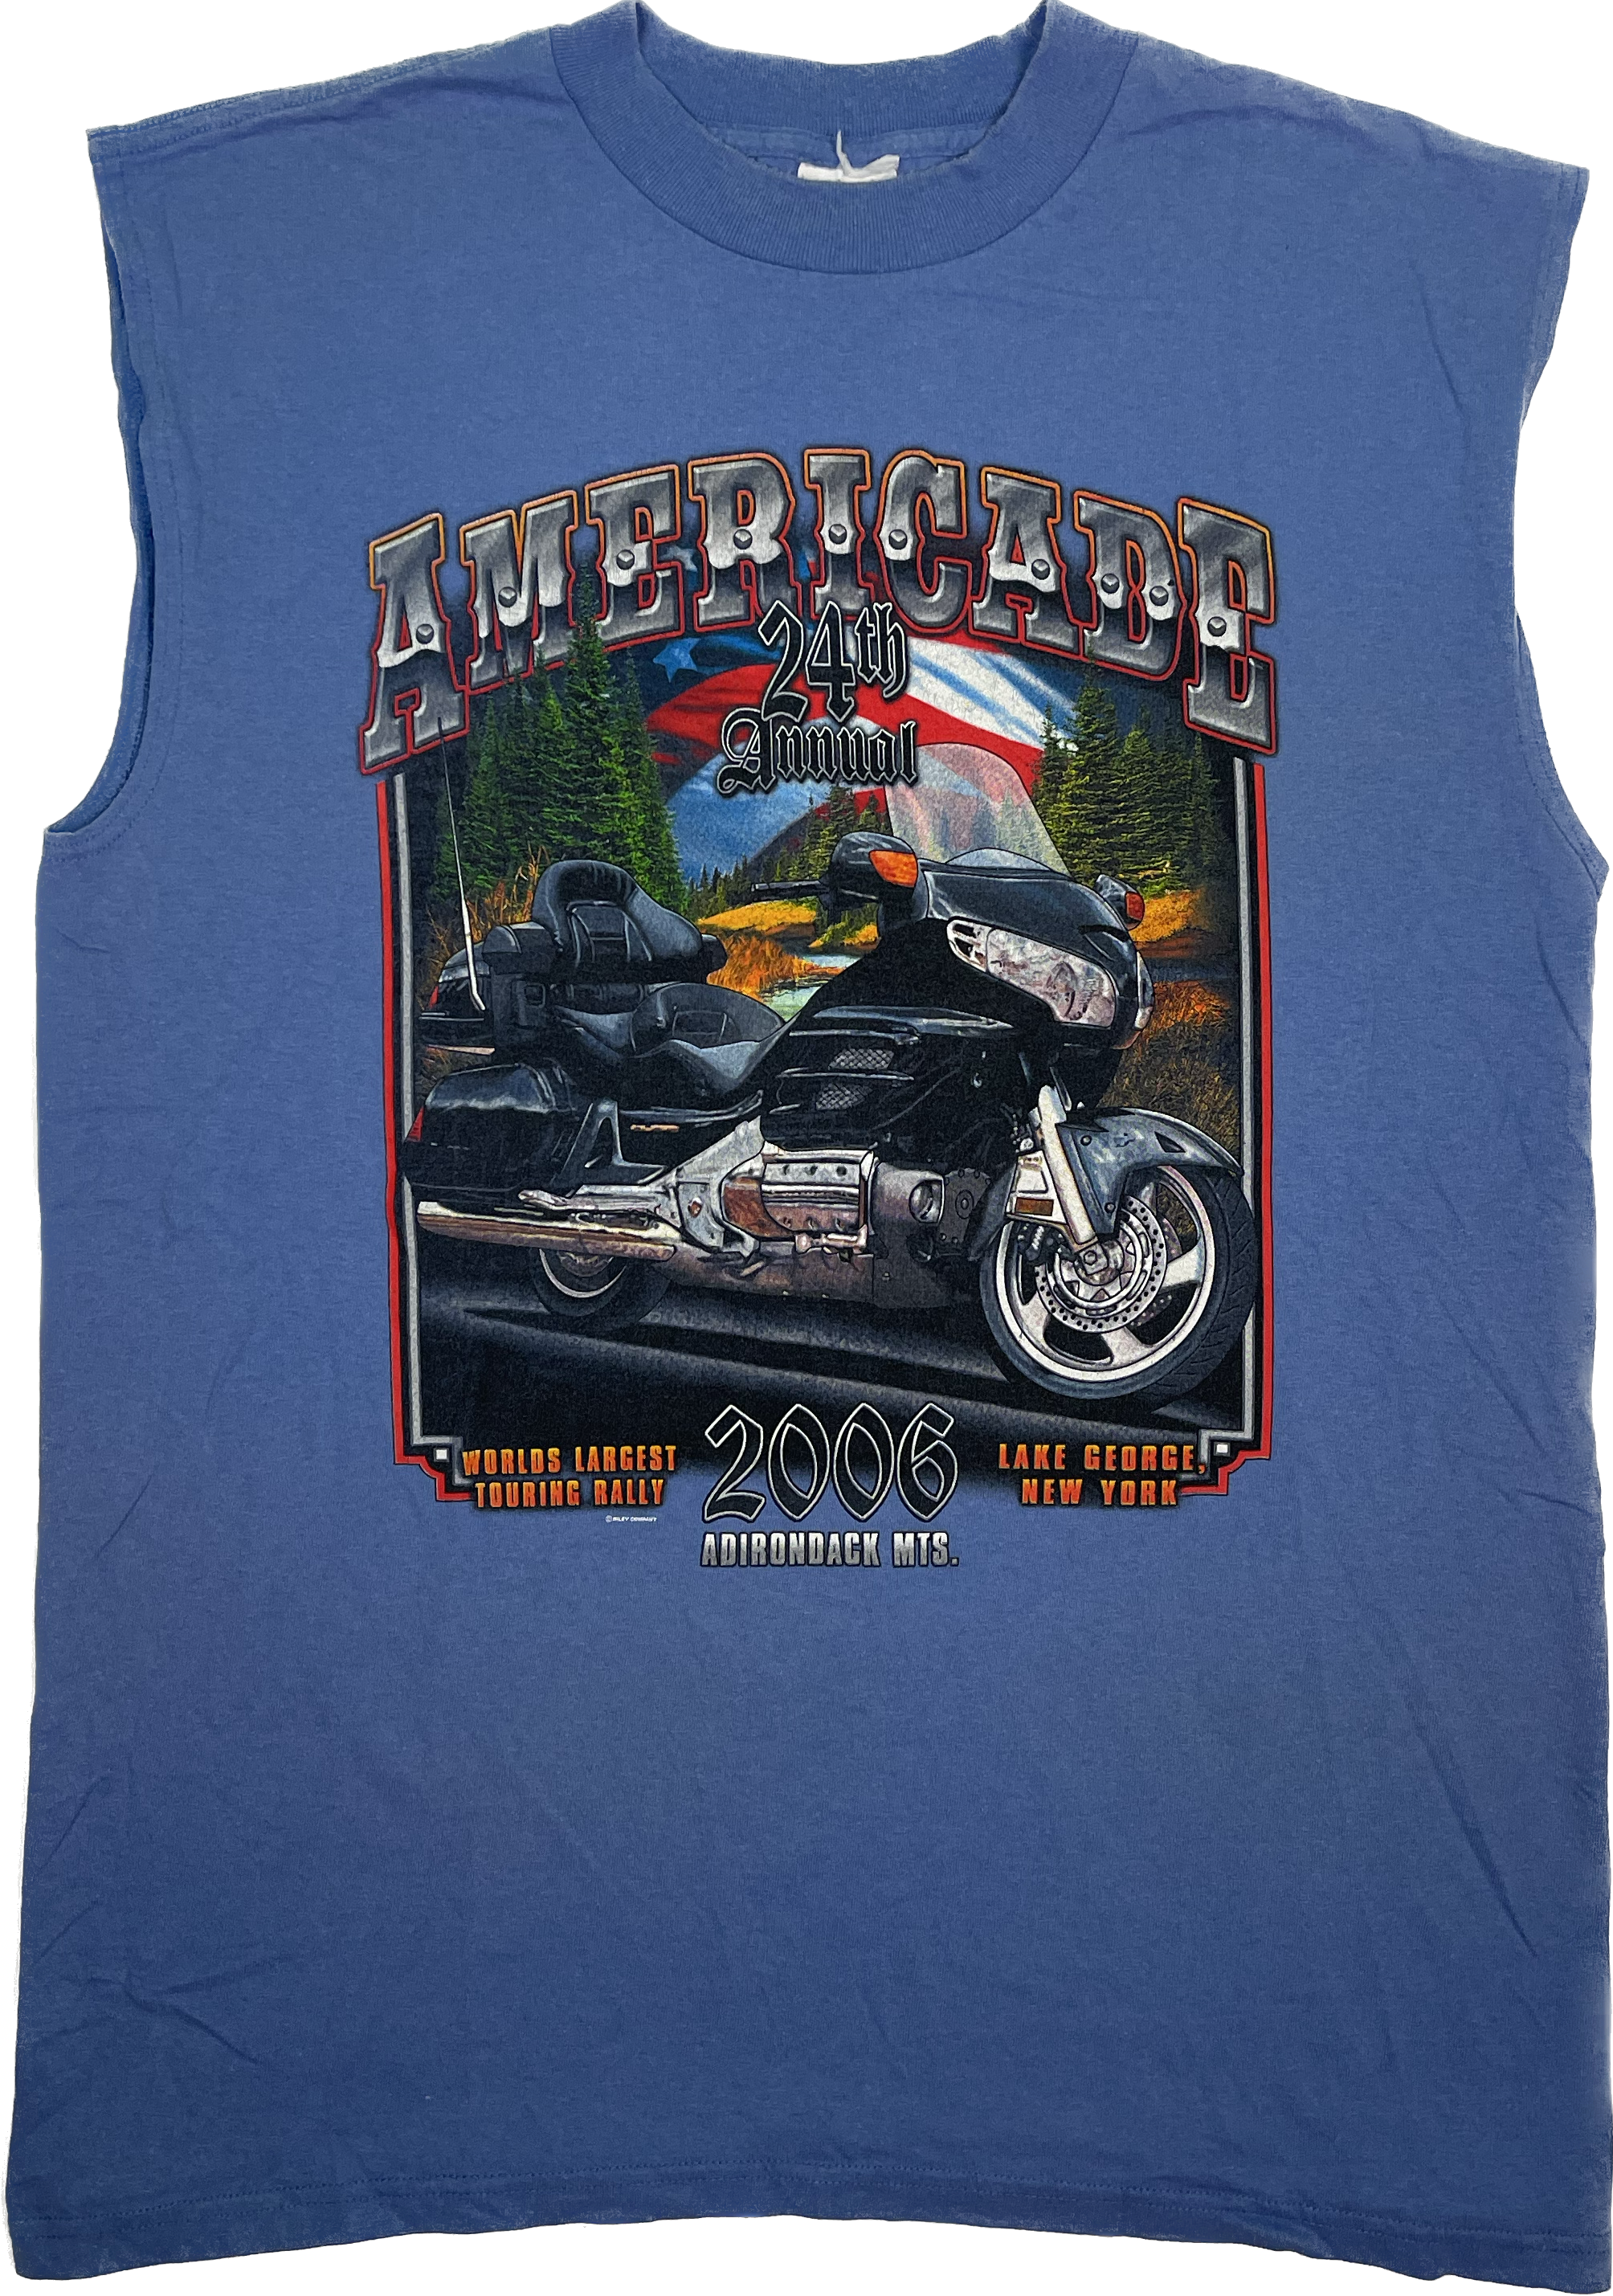 06&#39; Americade 24th Annual Worlds Largest Rally Lage George, New York 2006 Adirondack MTS. Tank Top